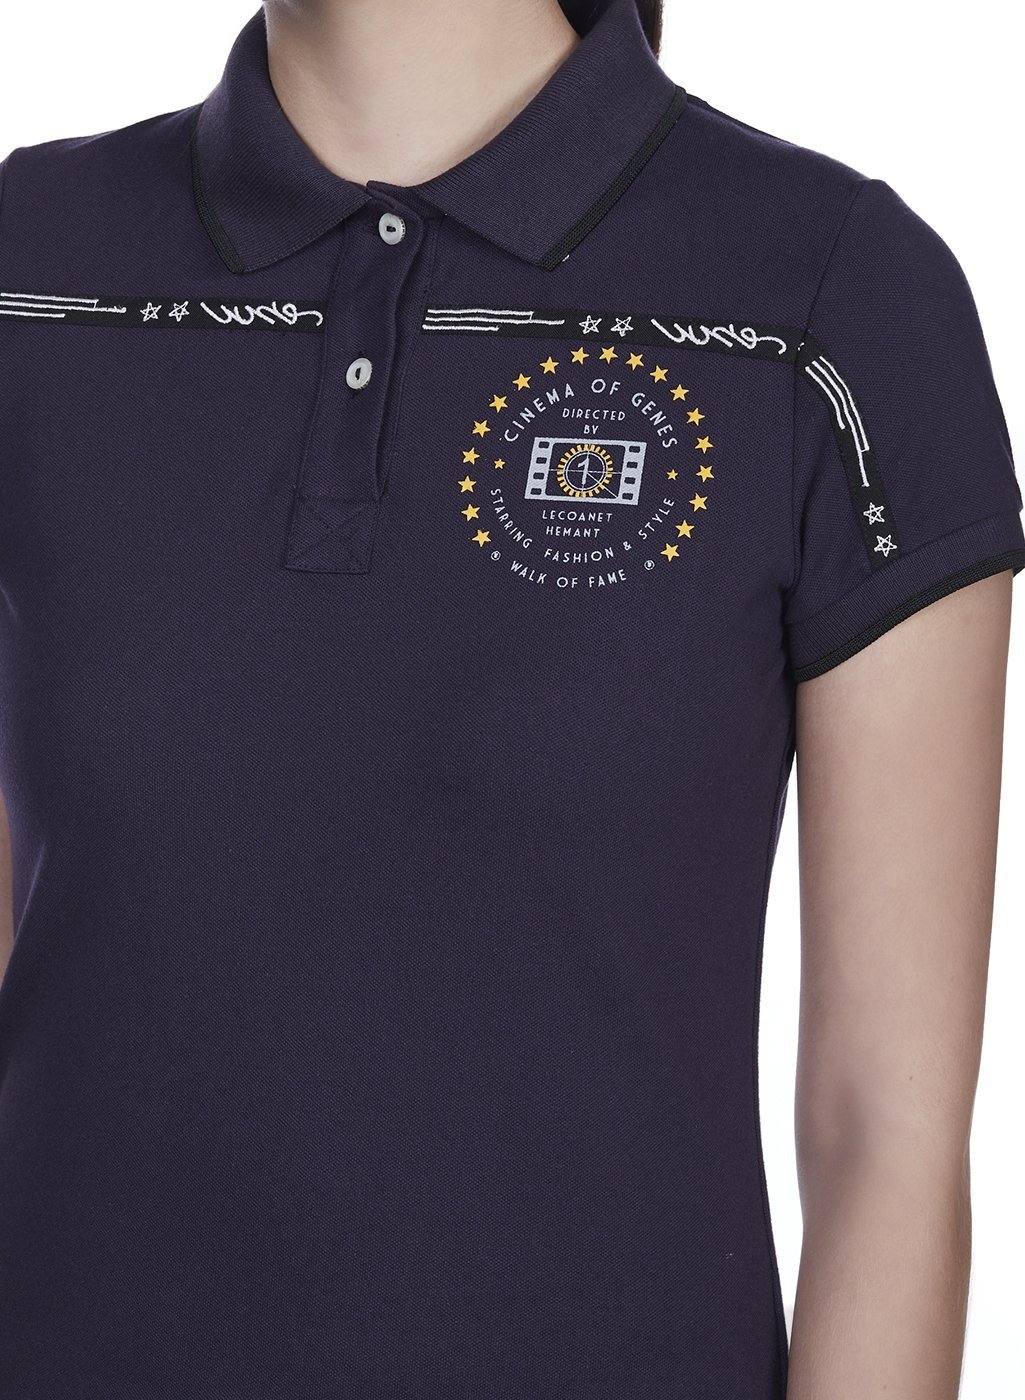 THE PEFECT AUDITION POLO - Genes online store 2020